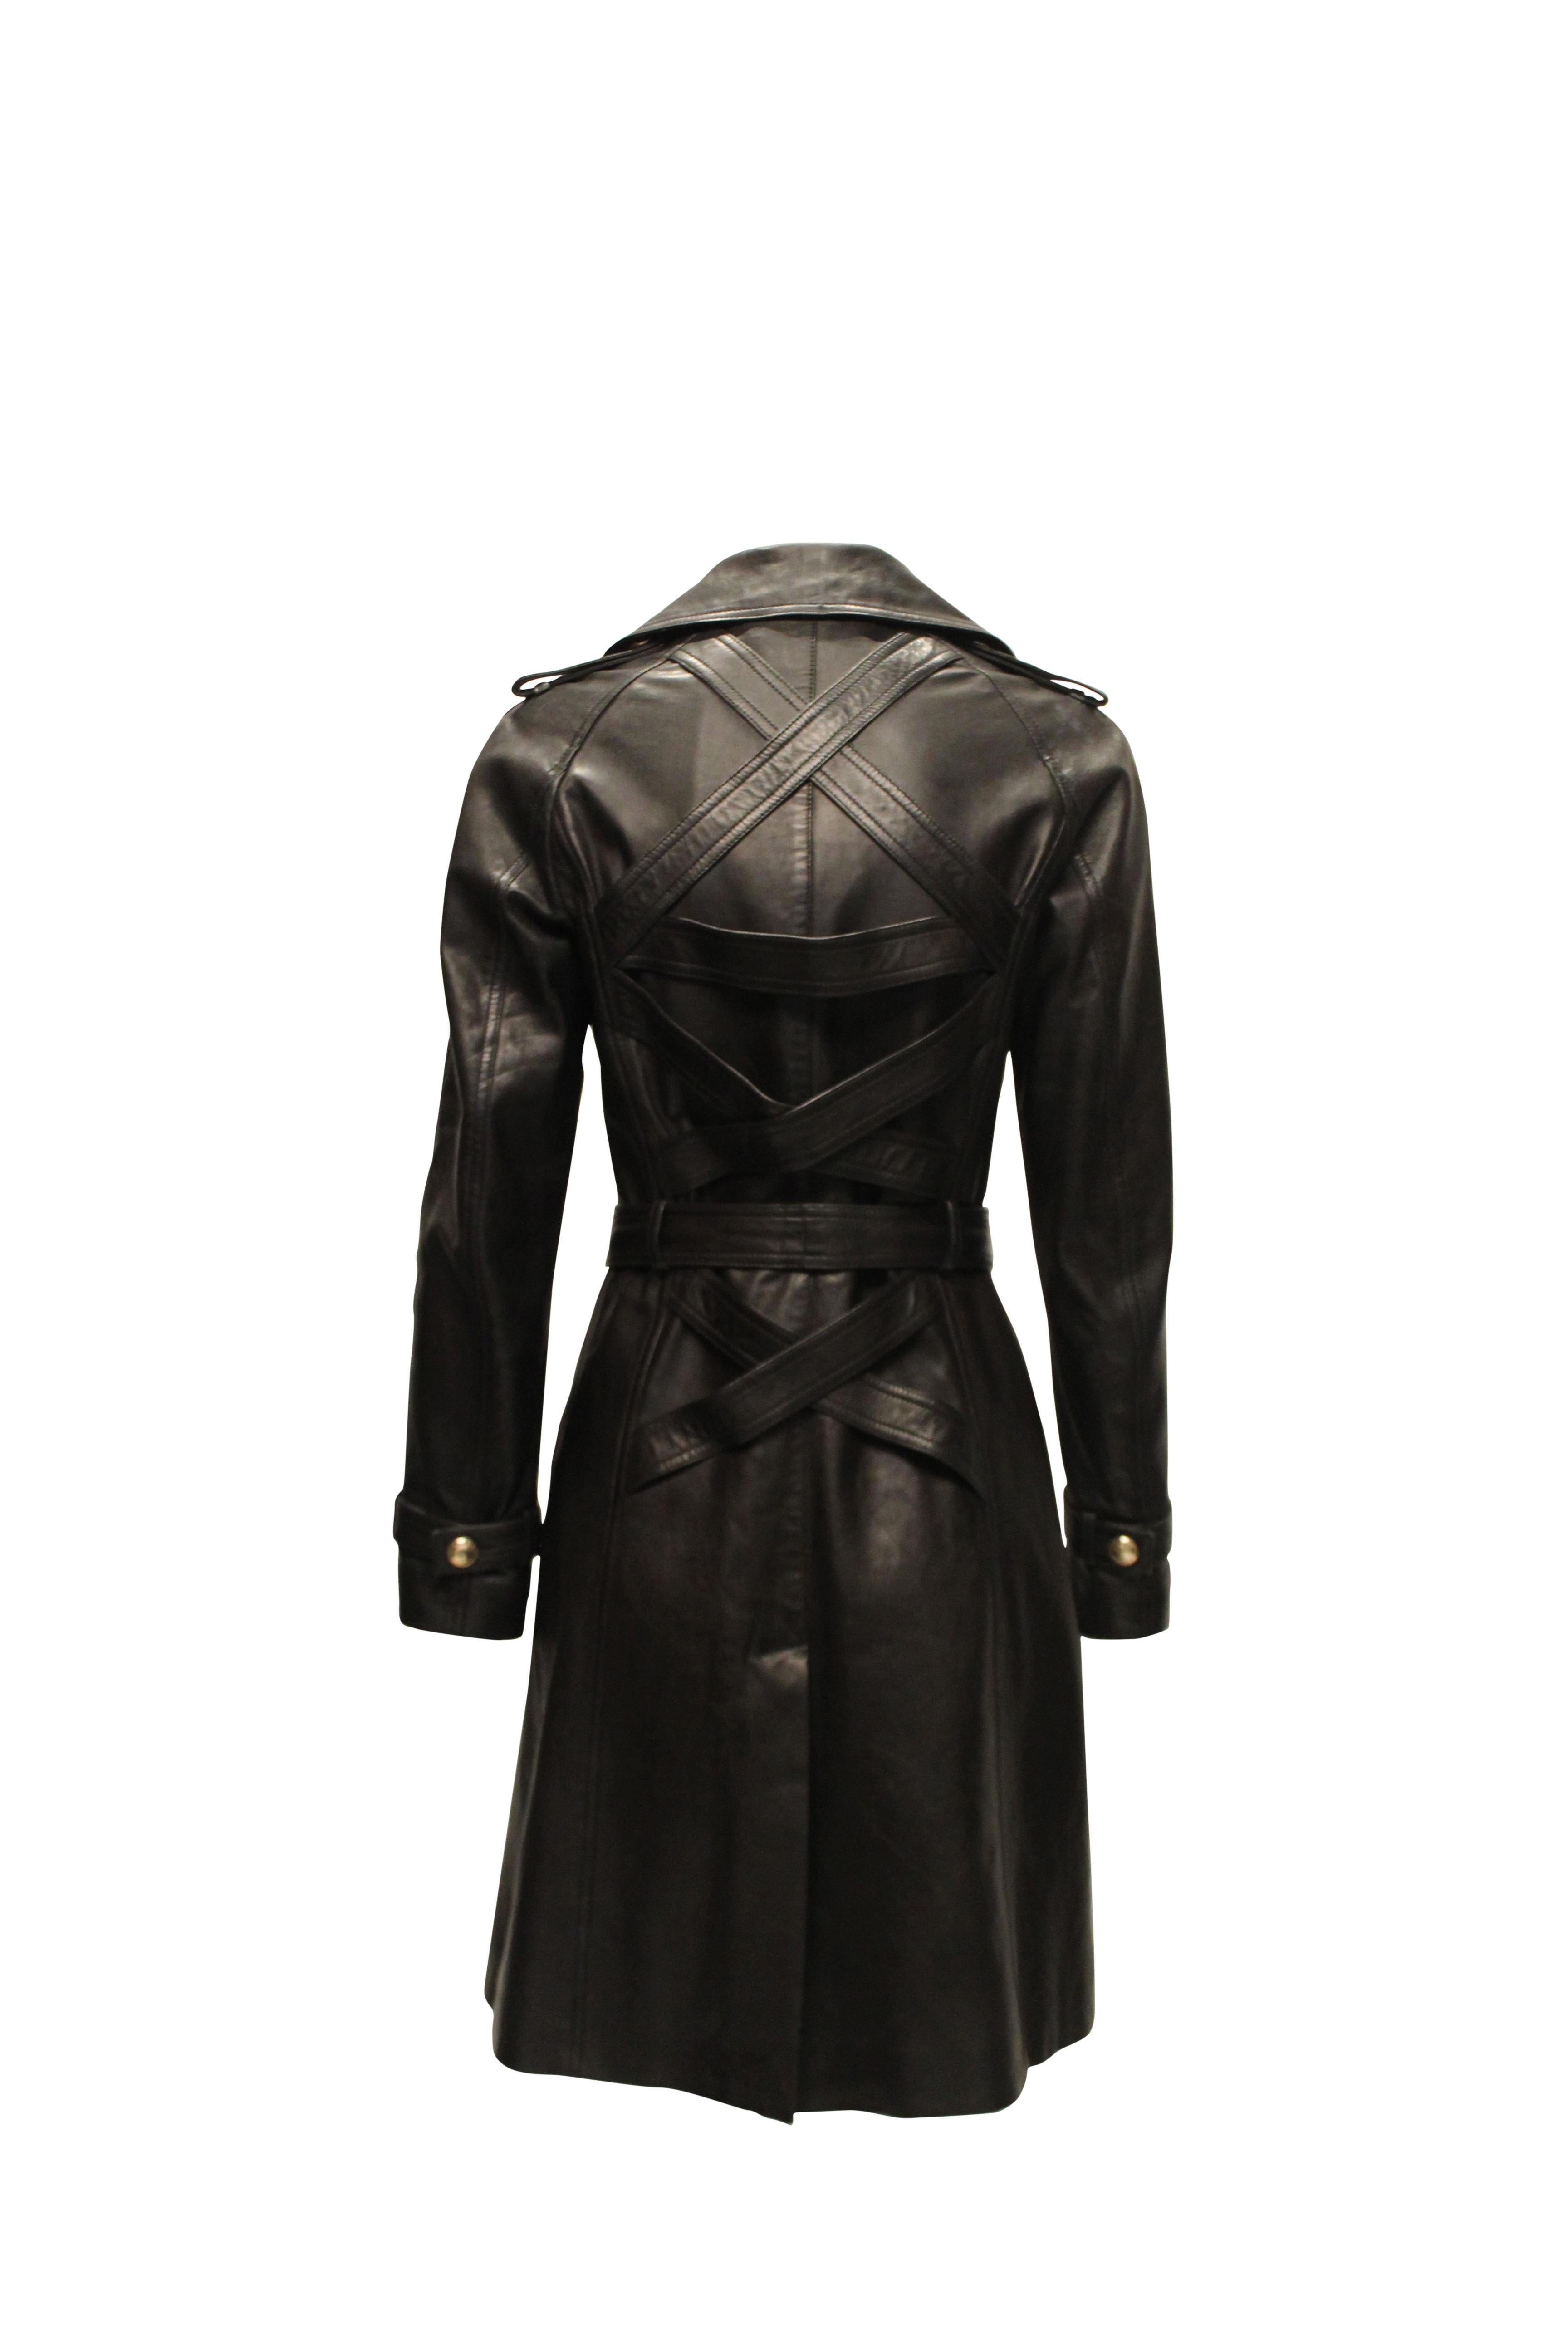 Versace double breasted leather coat. Featuring gold toned medusa head buttons and belt clasp.